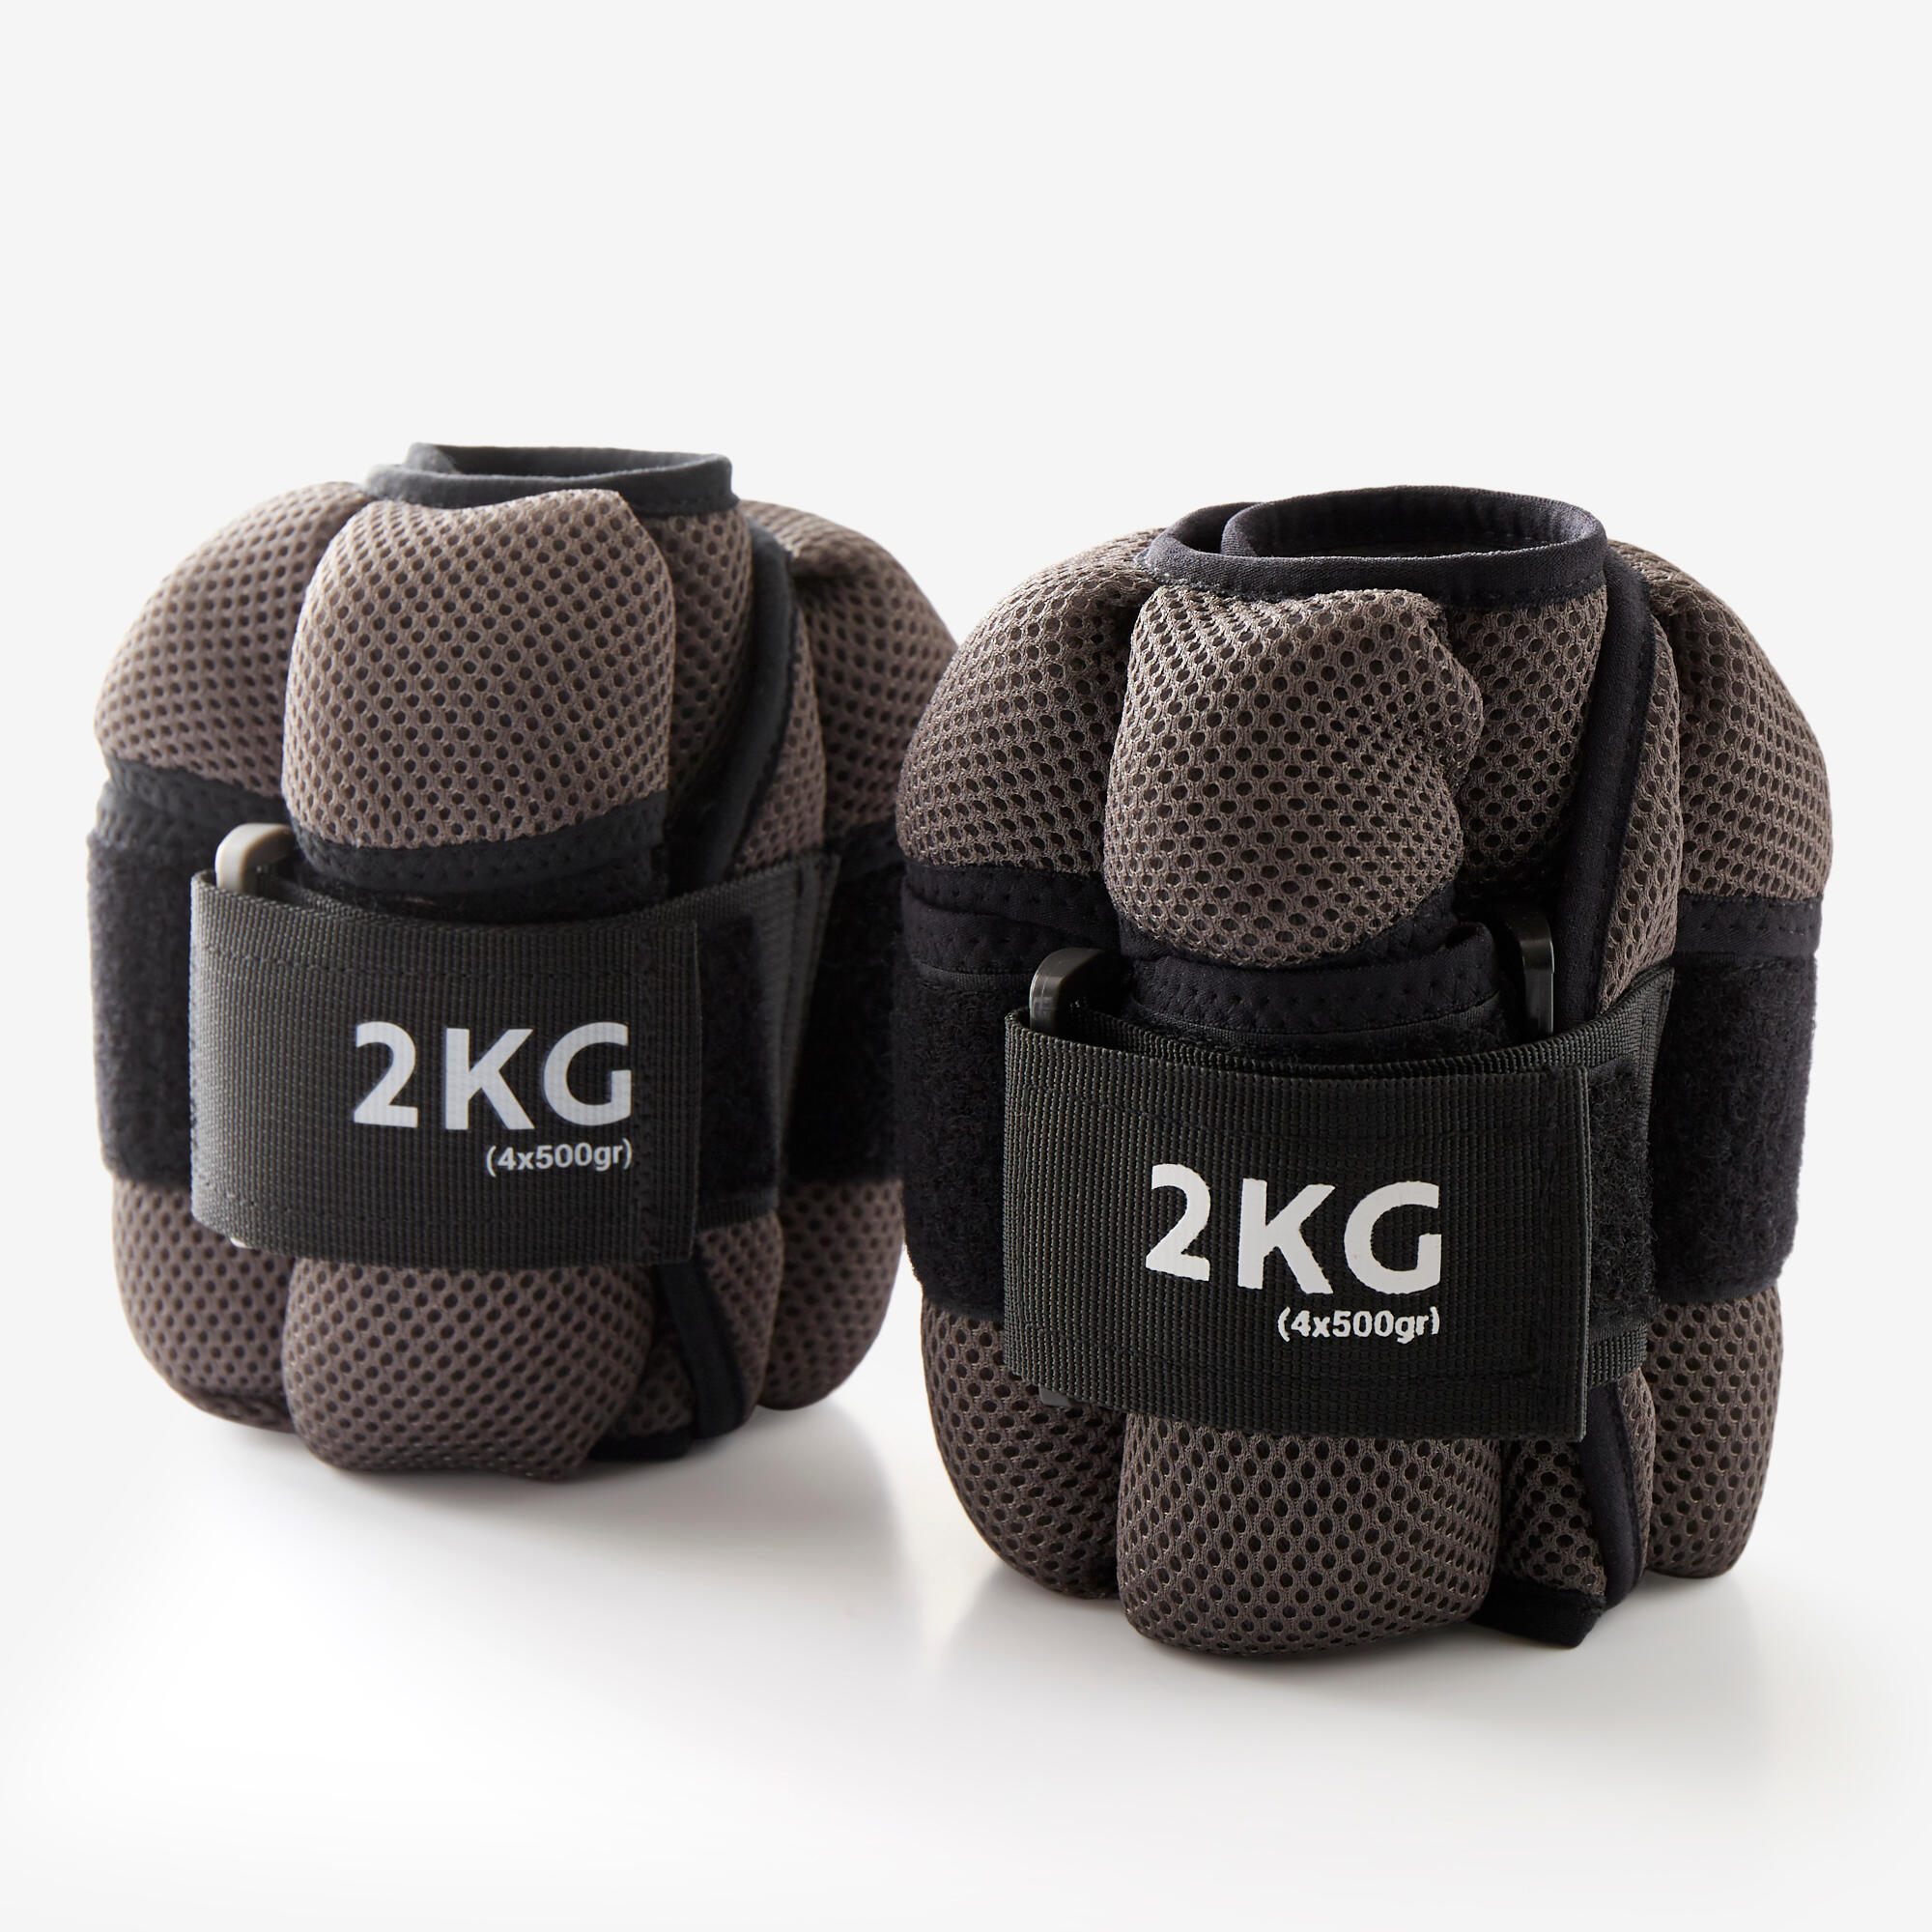 2 kg Adjustable Wrist / Ankle Weights Twin-Pack - Grey 1/9